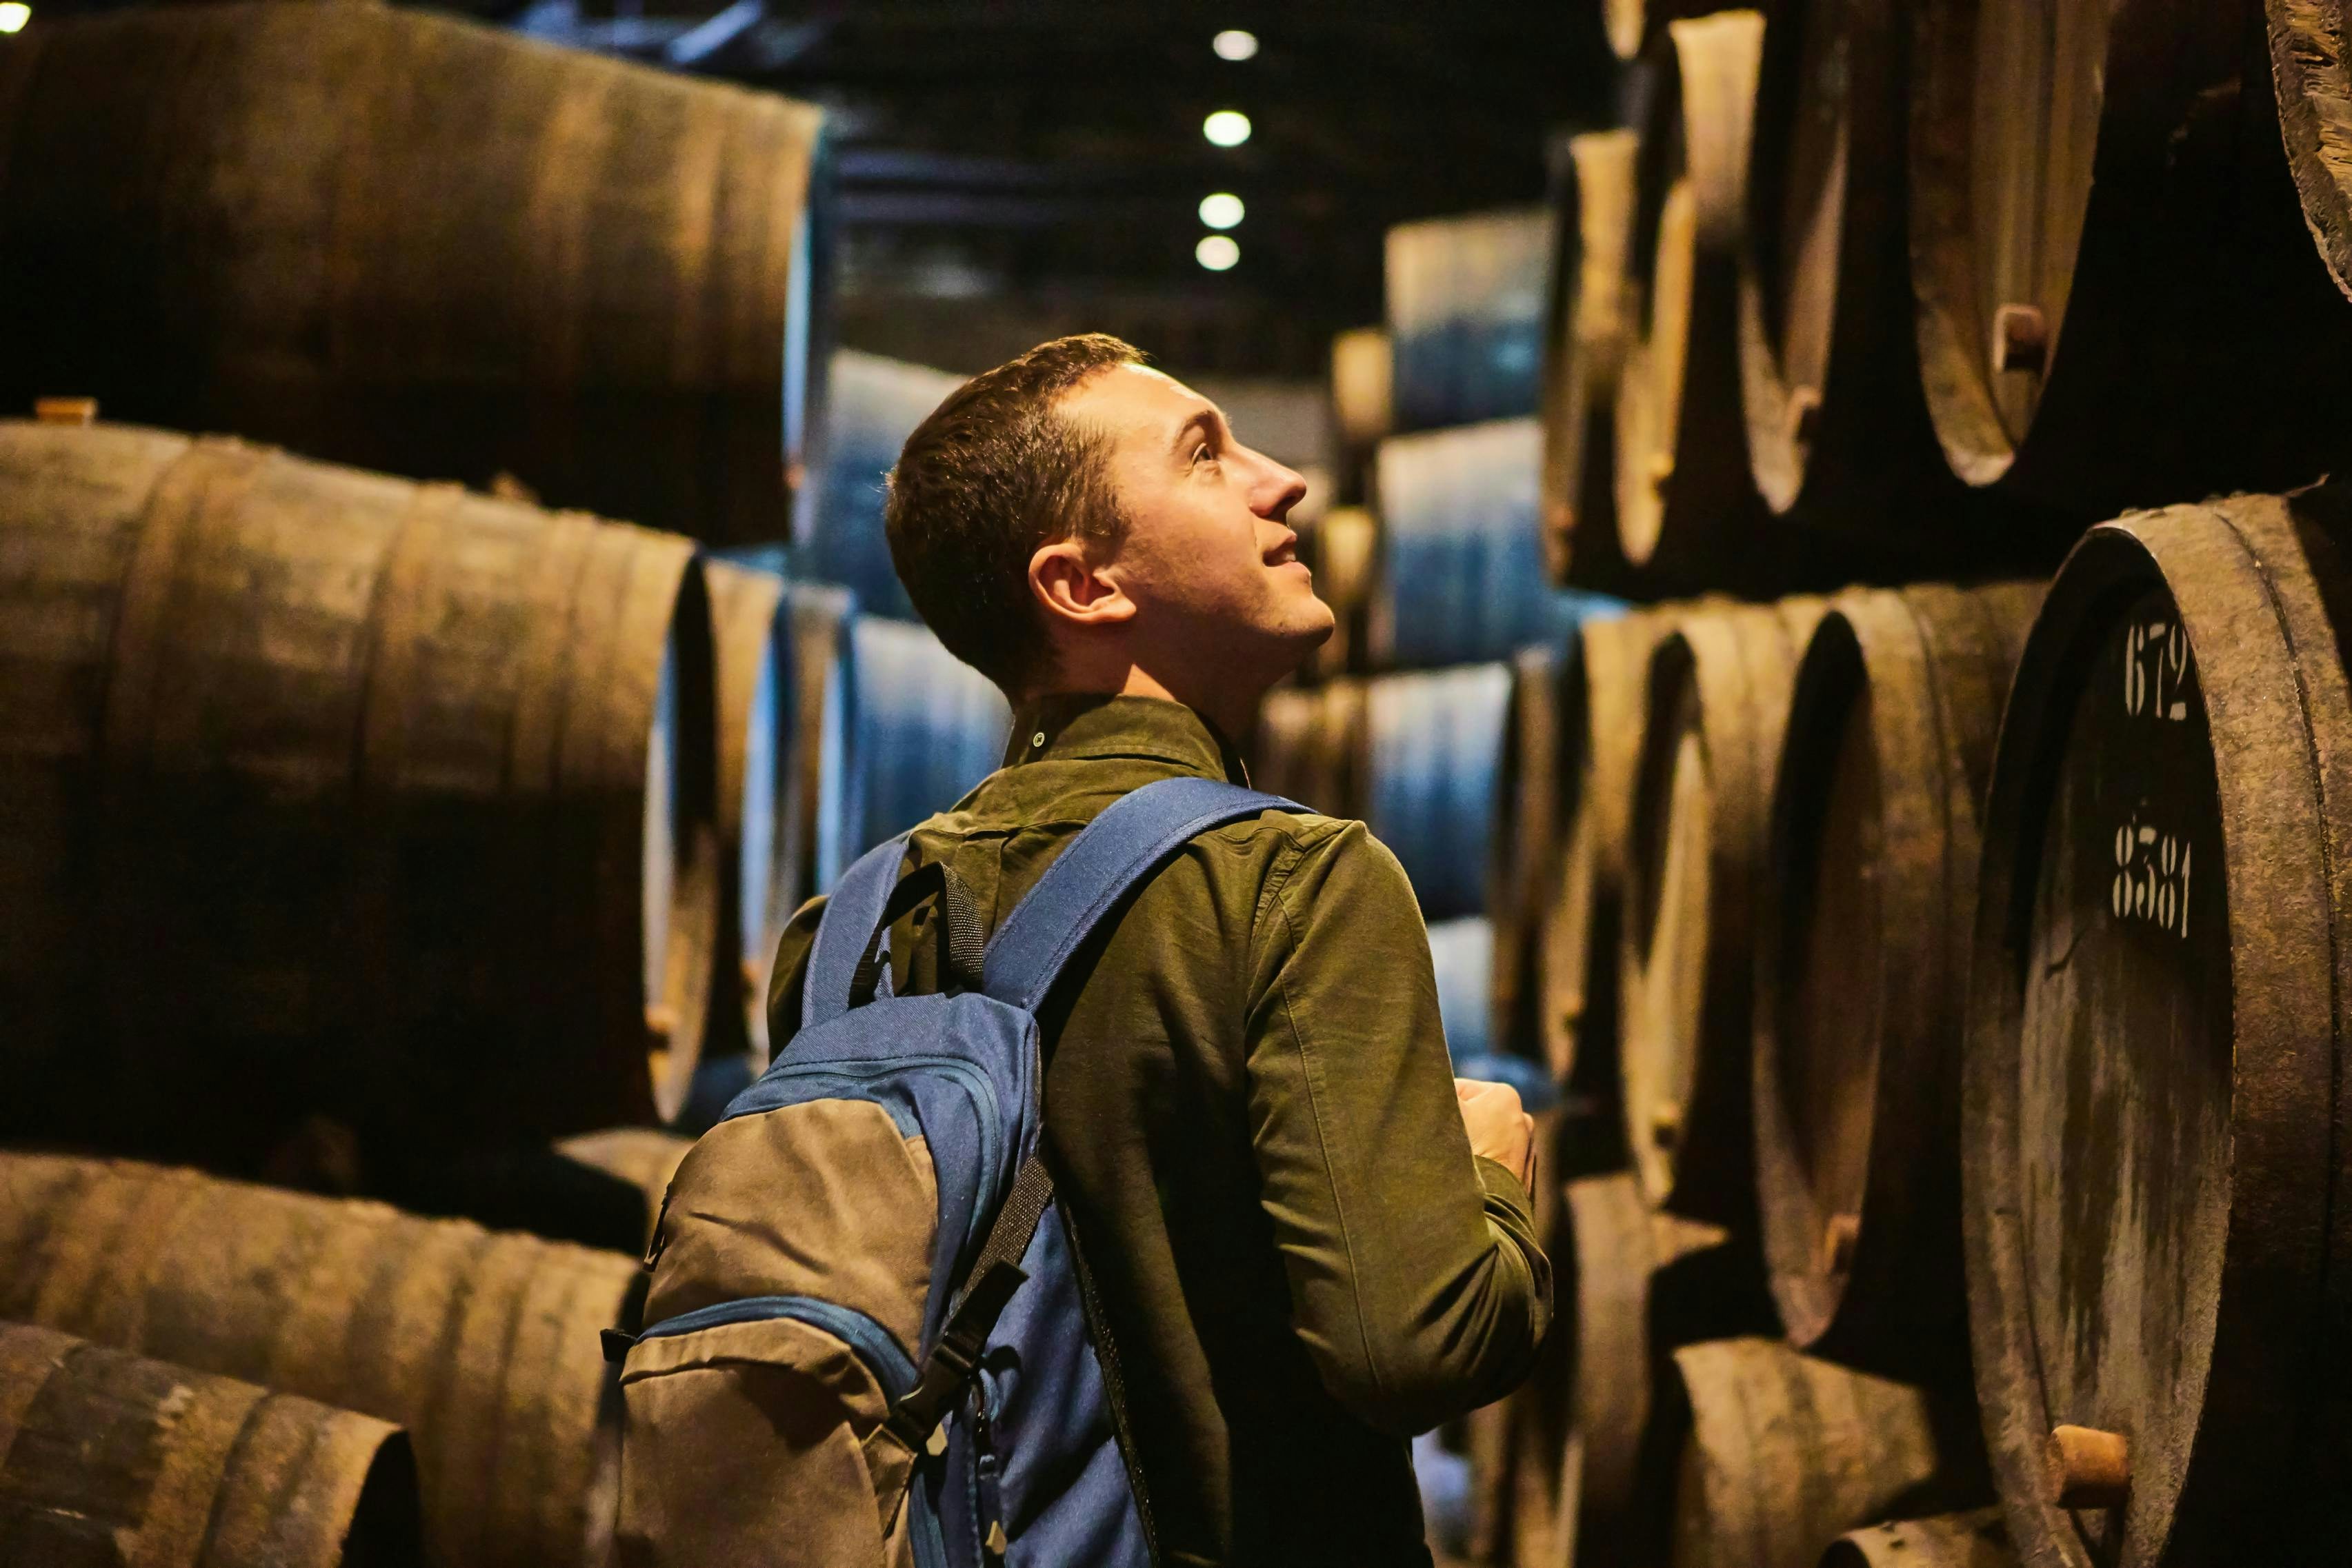 A photo of a man looking at barrels of wine in a cellar